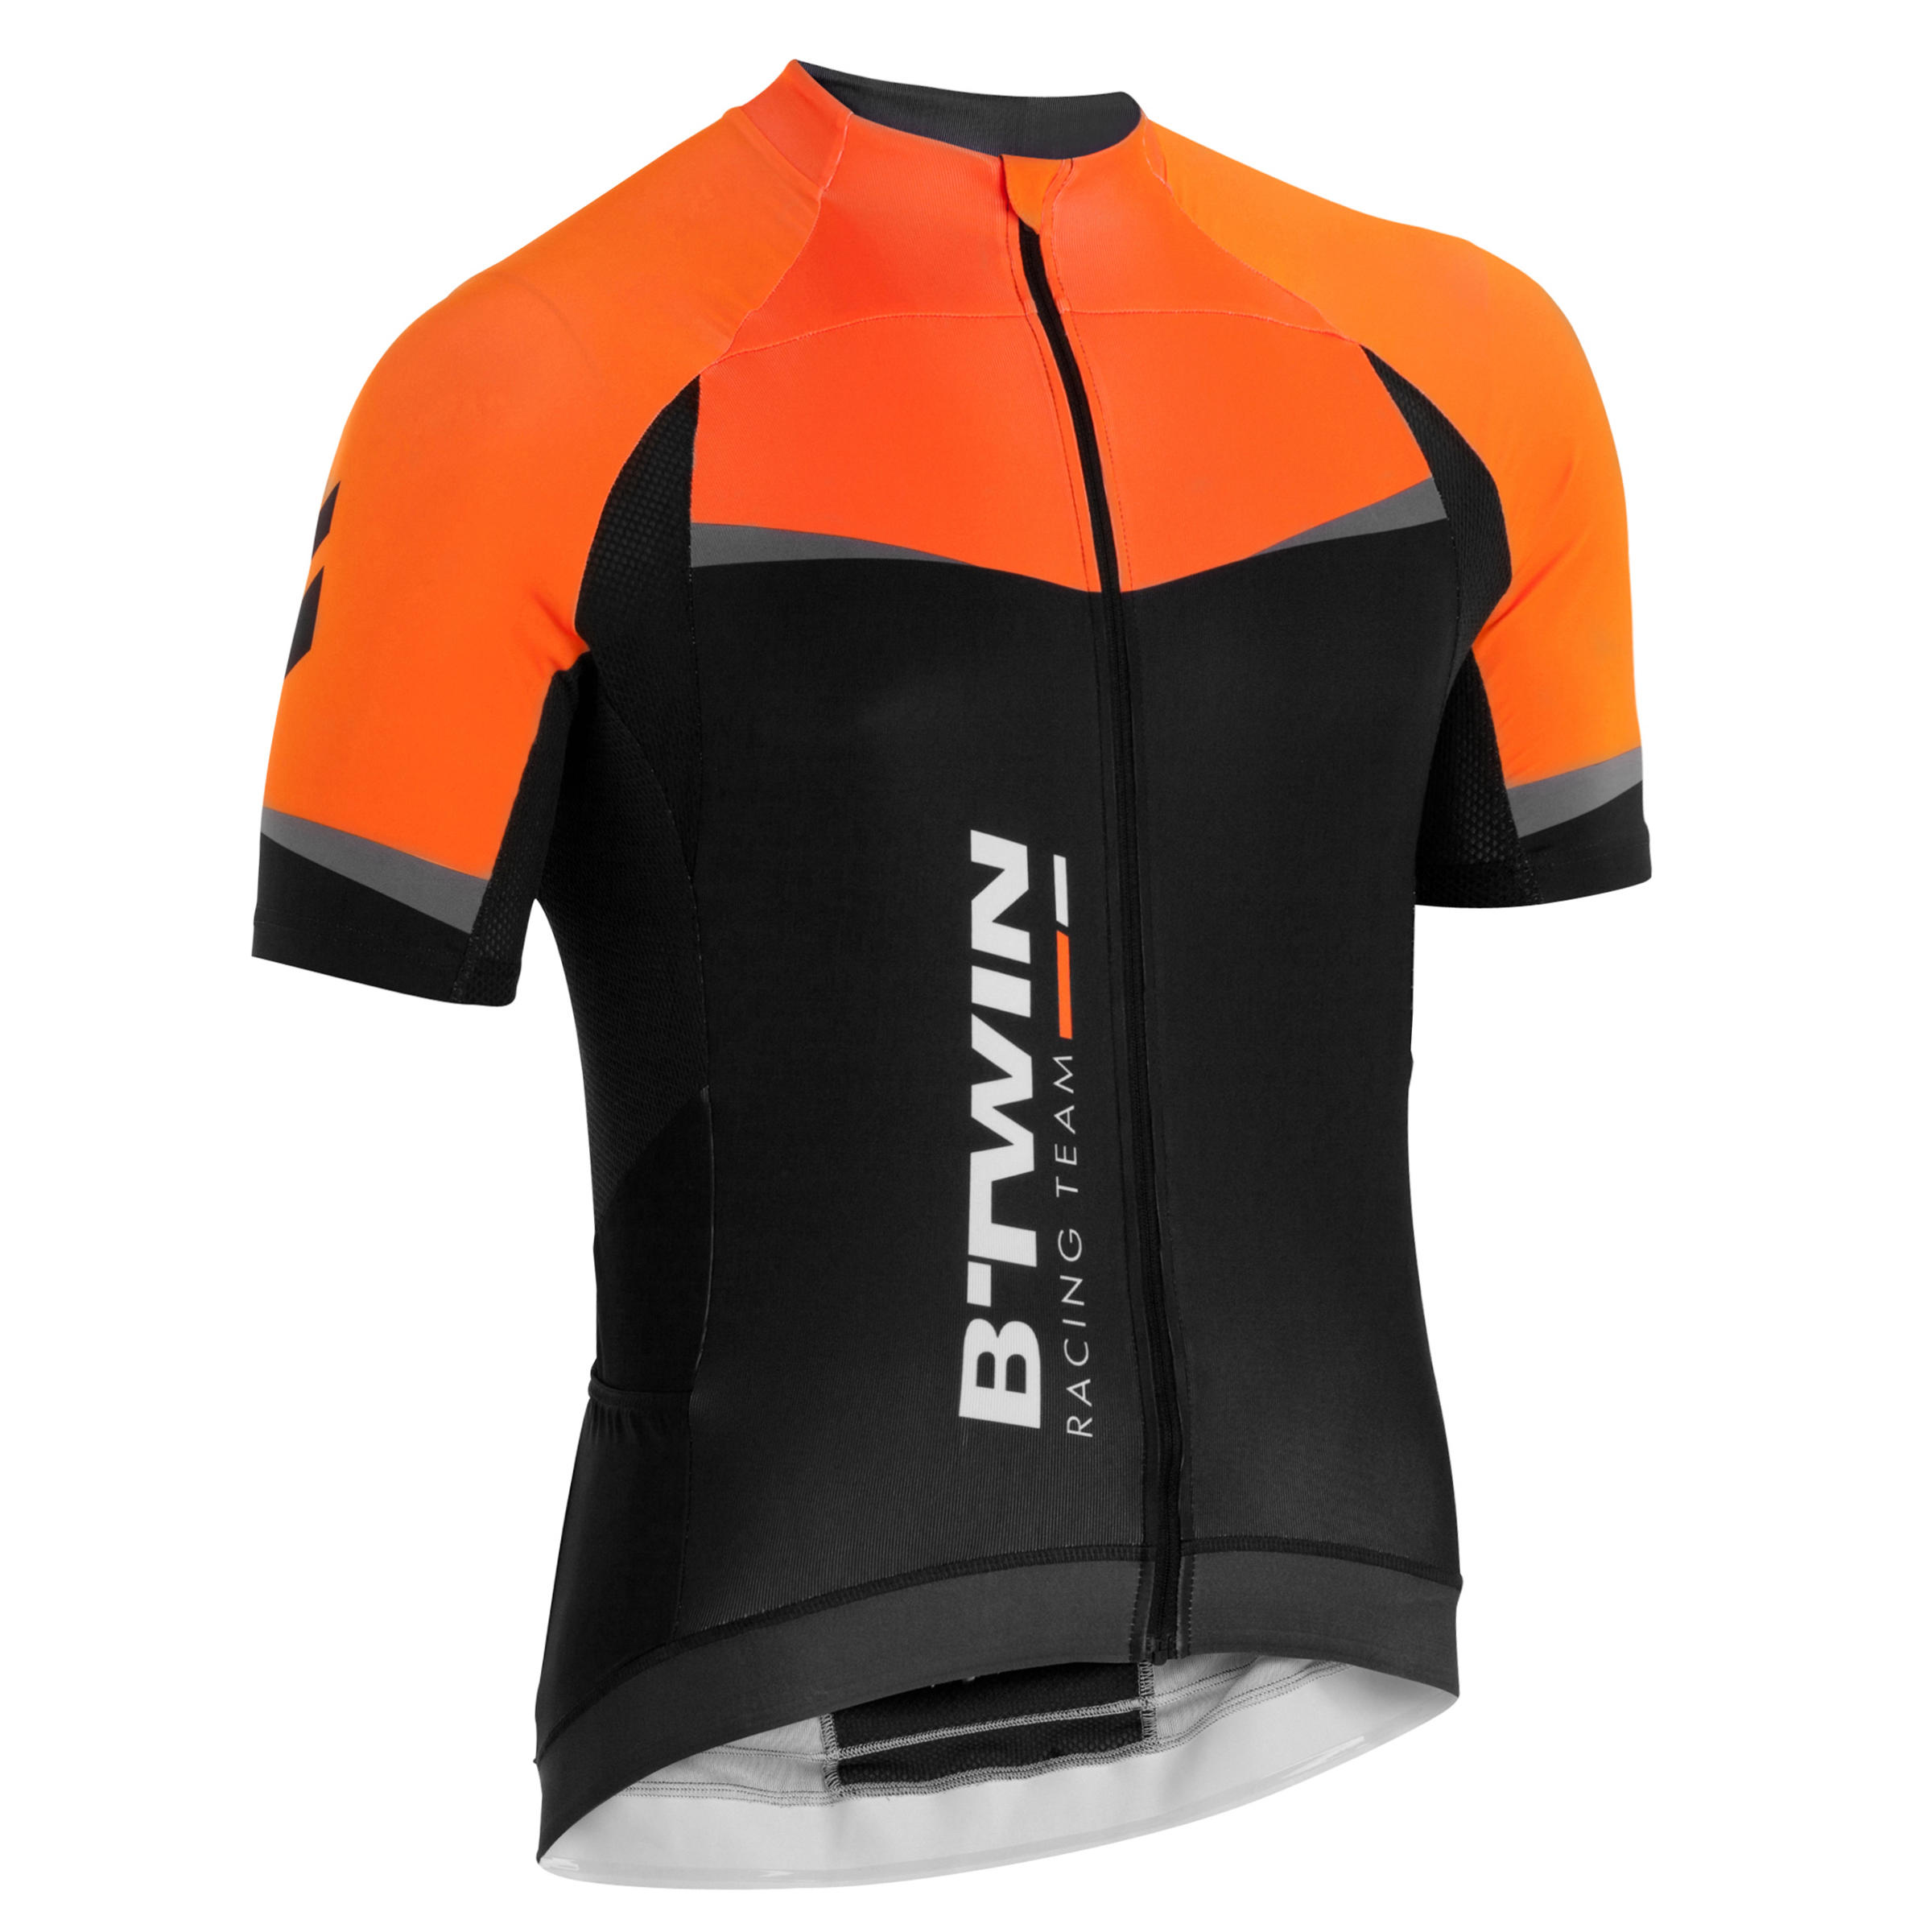 BTWIN 520 CYCLING SHORT-SLEEVED JERSEY - ORANGE